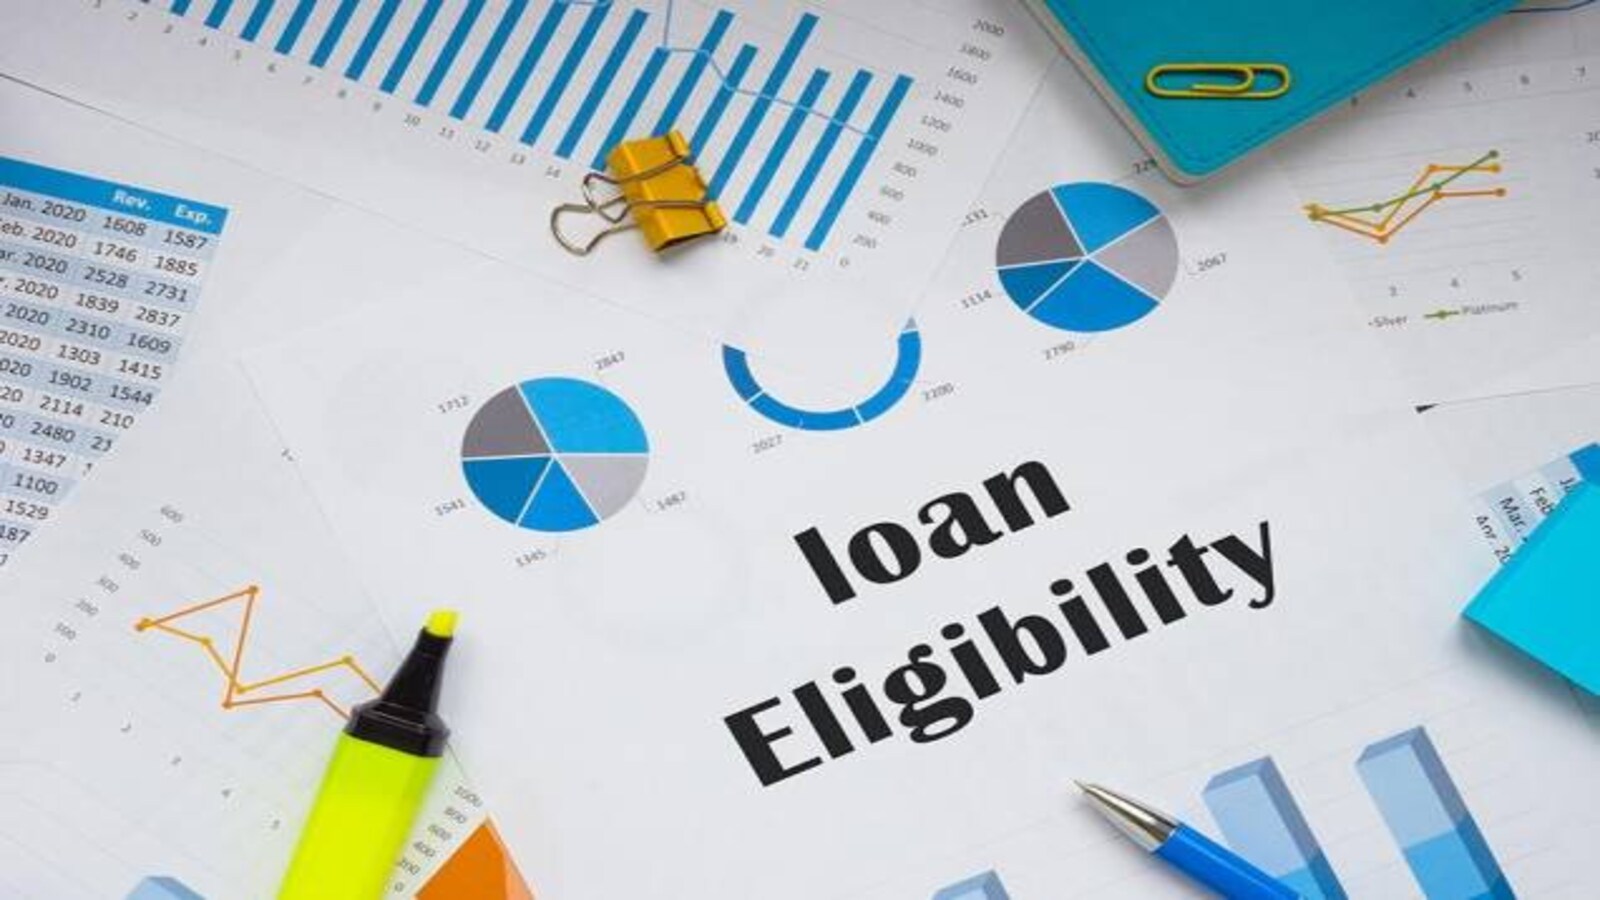 What Are Personal Loan Eligibility Requirements?